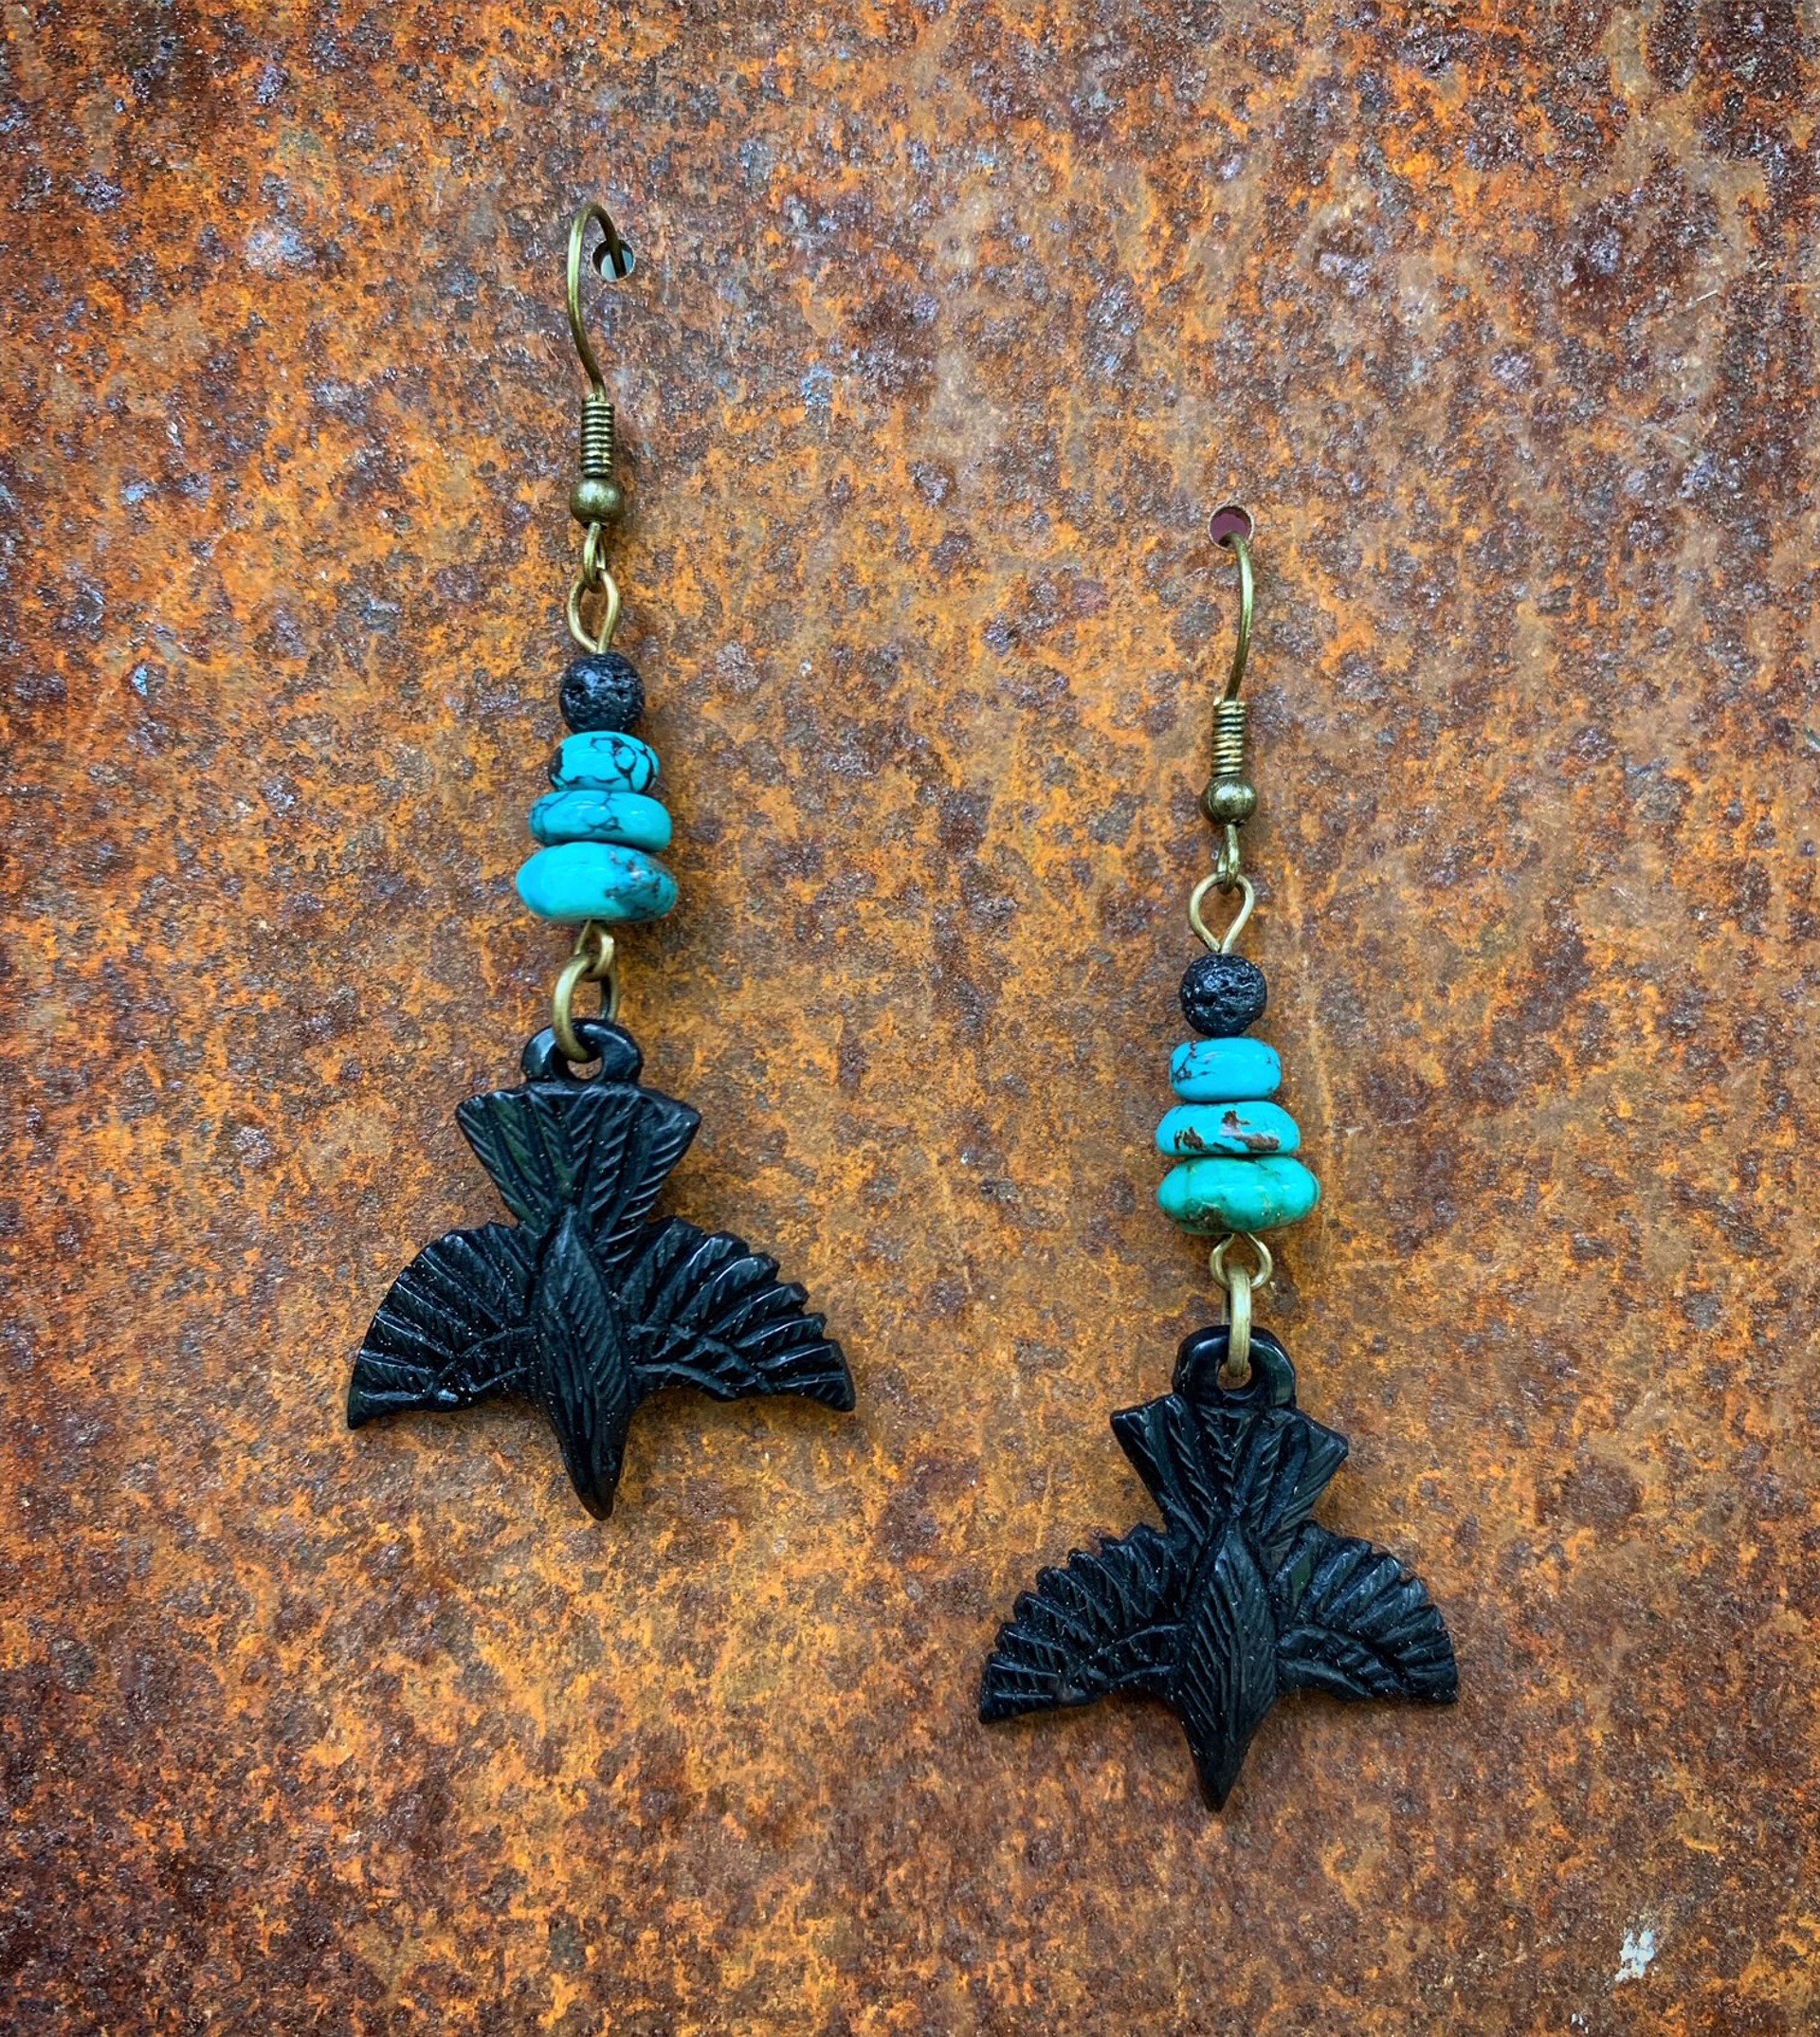 K847 Buffalo Horn Ravens with Turquoise by Kelly Ormsby